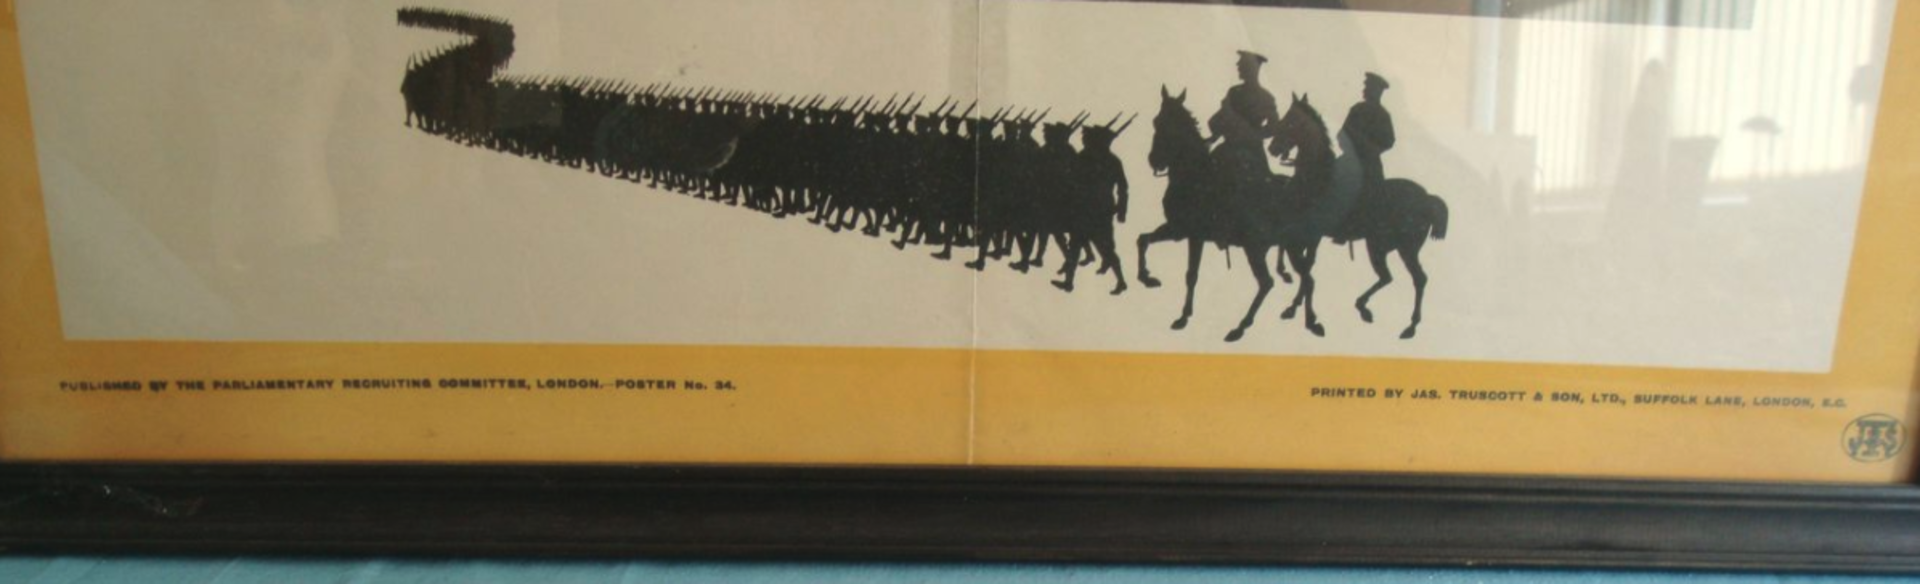 Original Framed WW1 British Government Parliamentary Recruiting Committee Recruitment Poster - Image 3 of 3